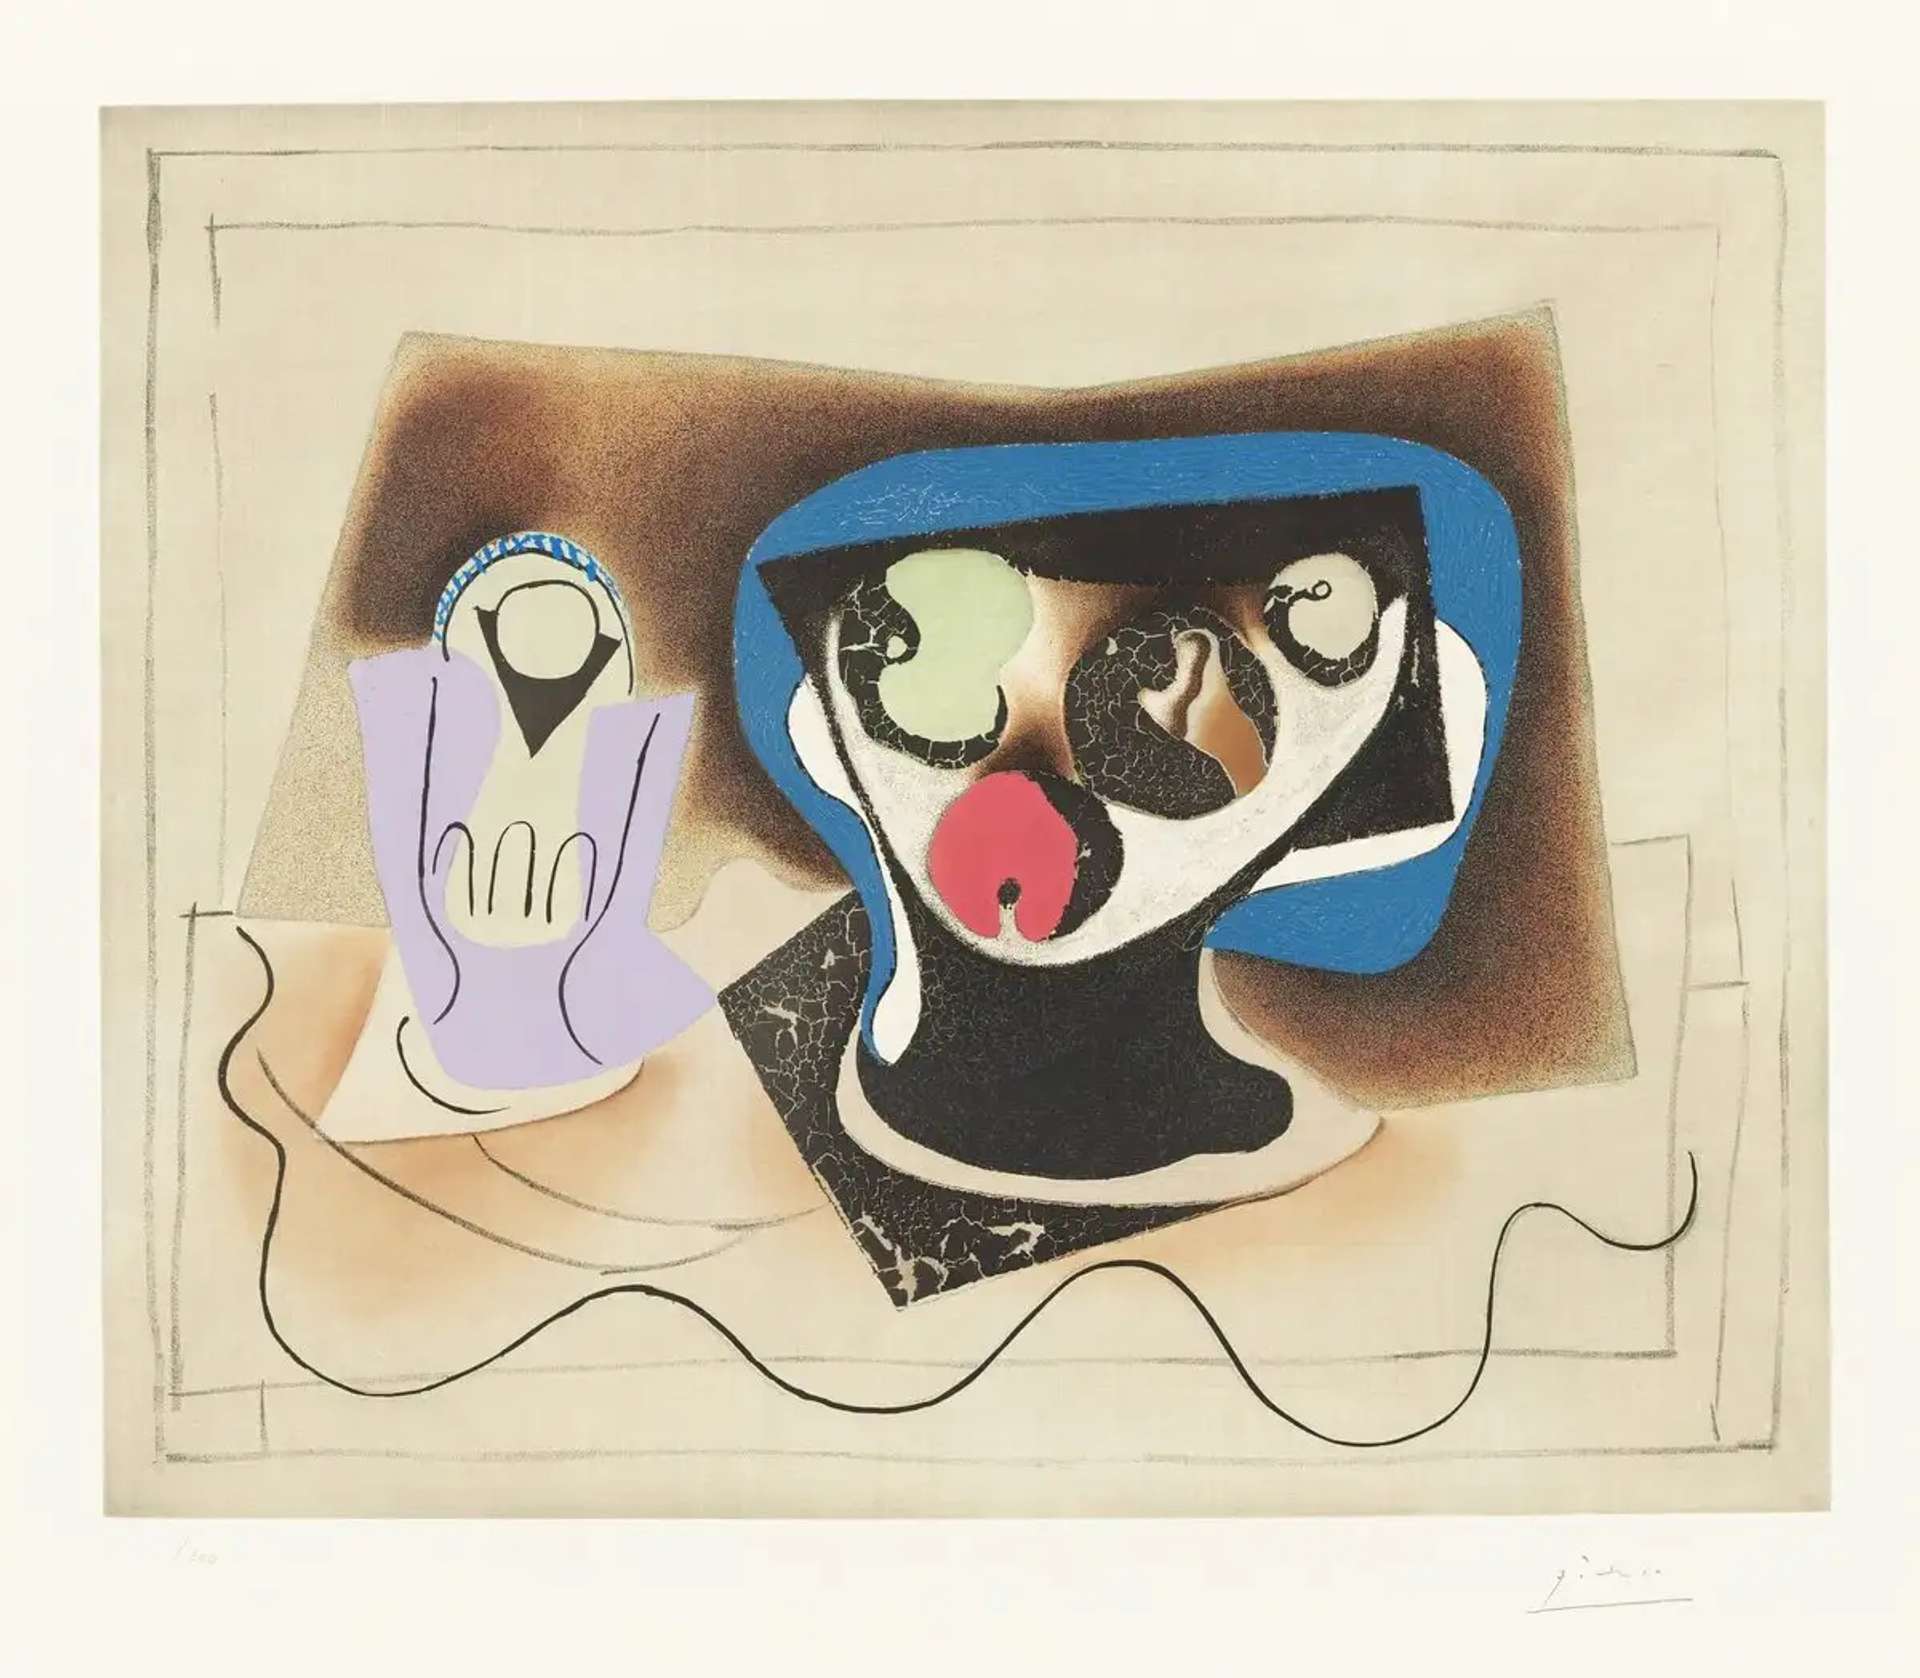 An image of the artwork Le Verre d'Absinthe by Pablo Picasso. It shows an absinthe glass on a table, sitting alongside abstracted shapes.